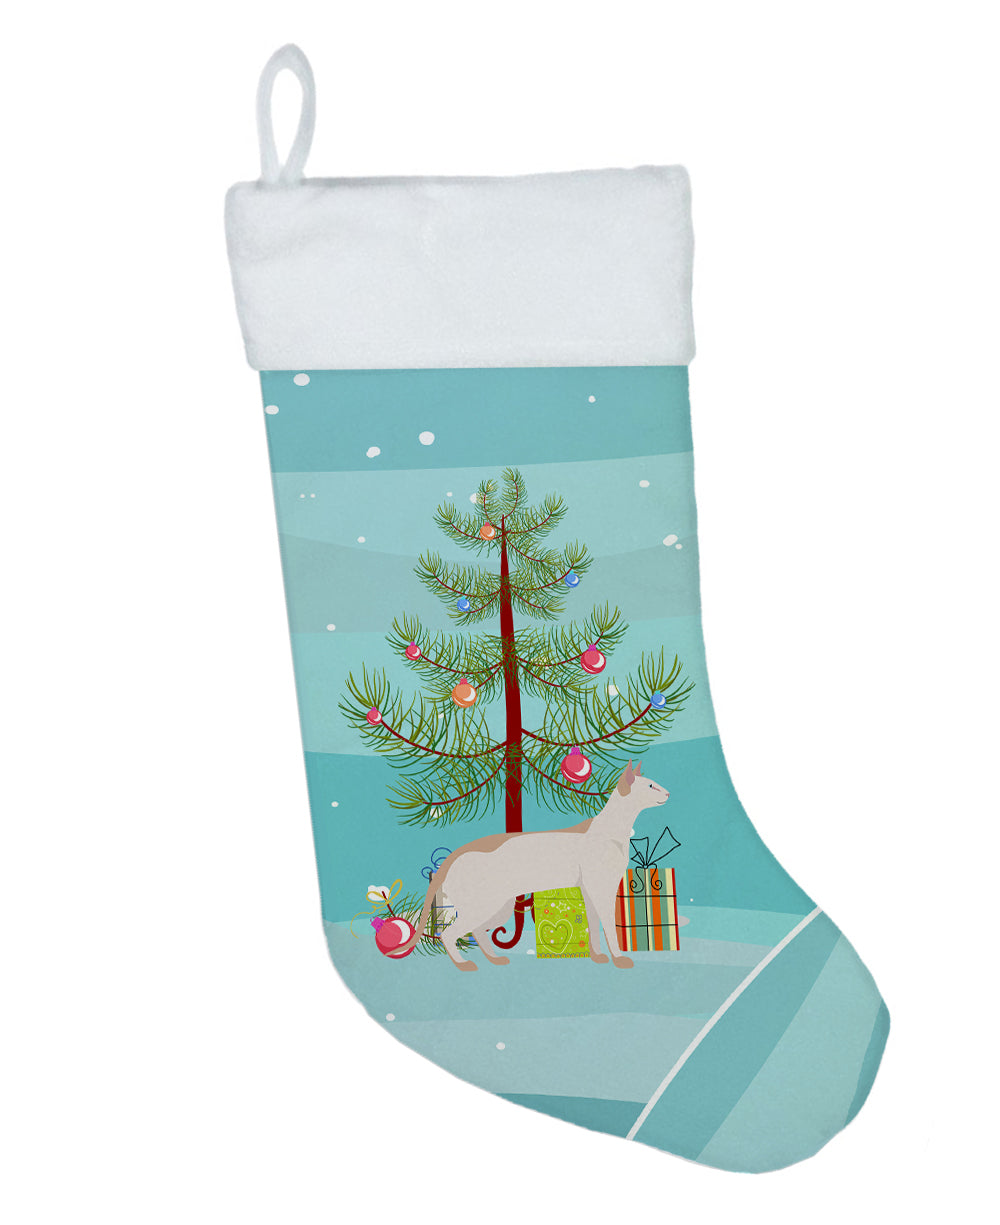 Colorpoint Shorthair #3 Cat Merry Christmas Christmas Stocking